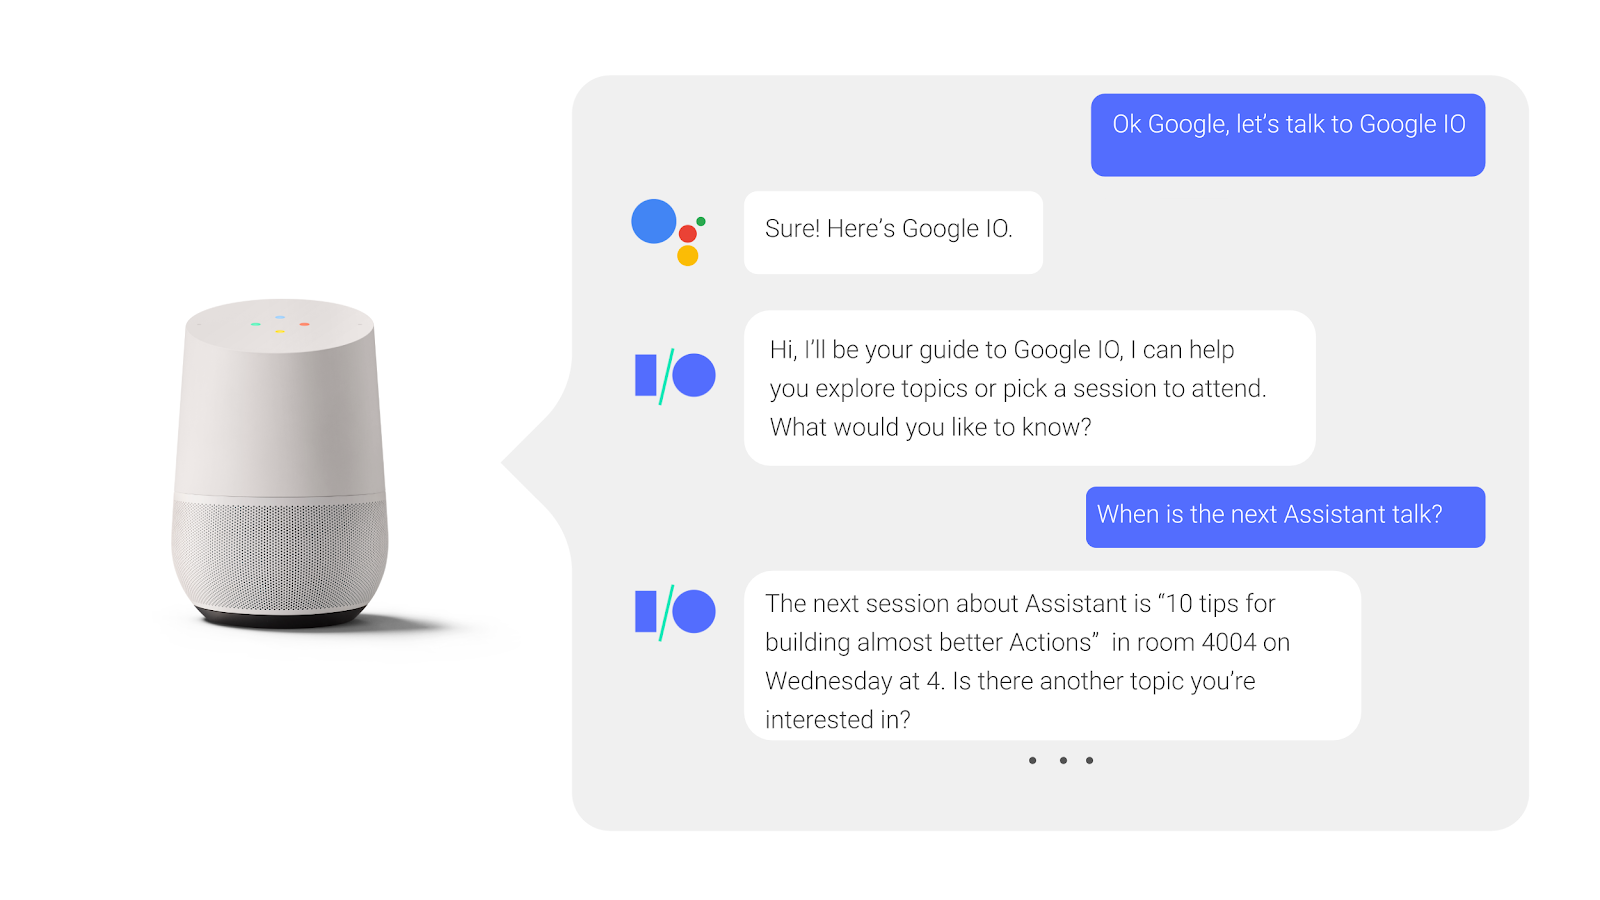 In
    a back-and-forth conversation with the Google Assistant, a user asks about
    and receives an answer for when a conference session is happening.